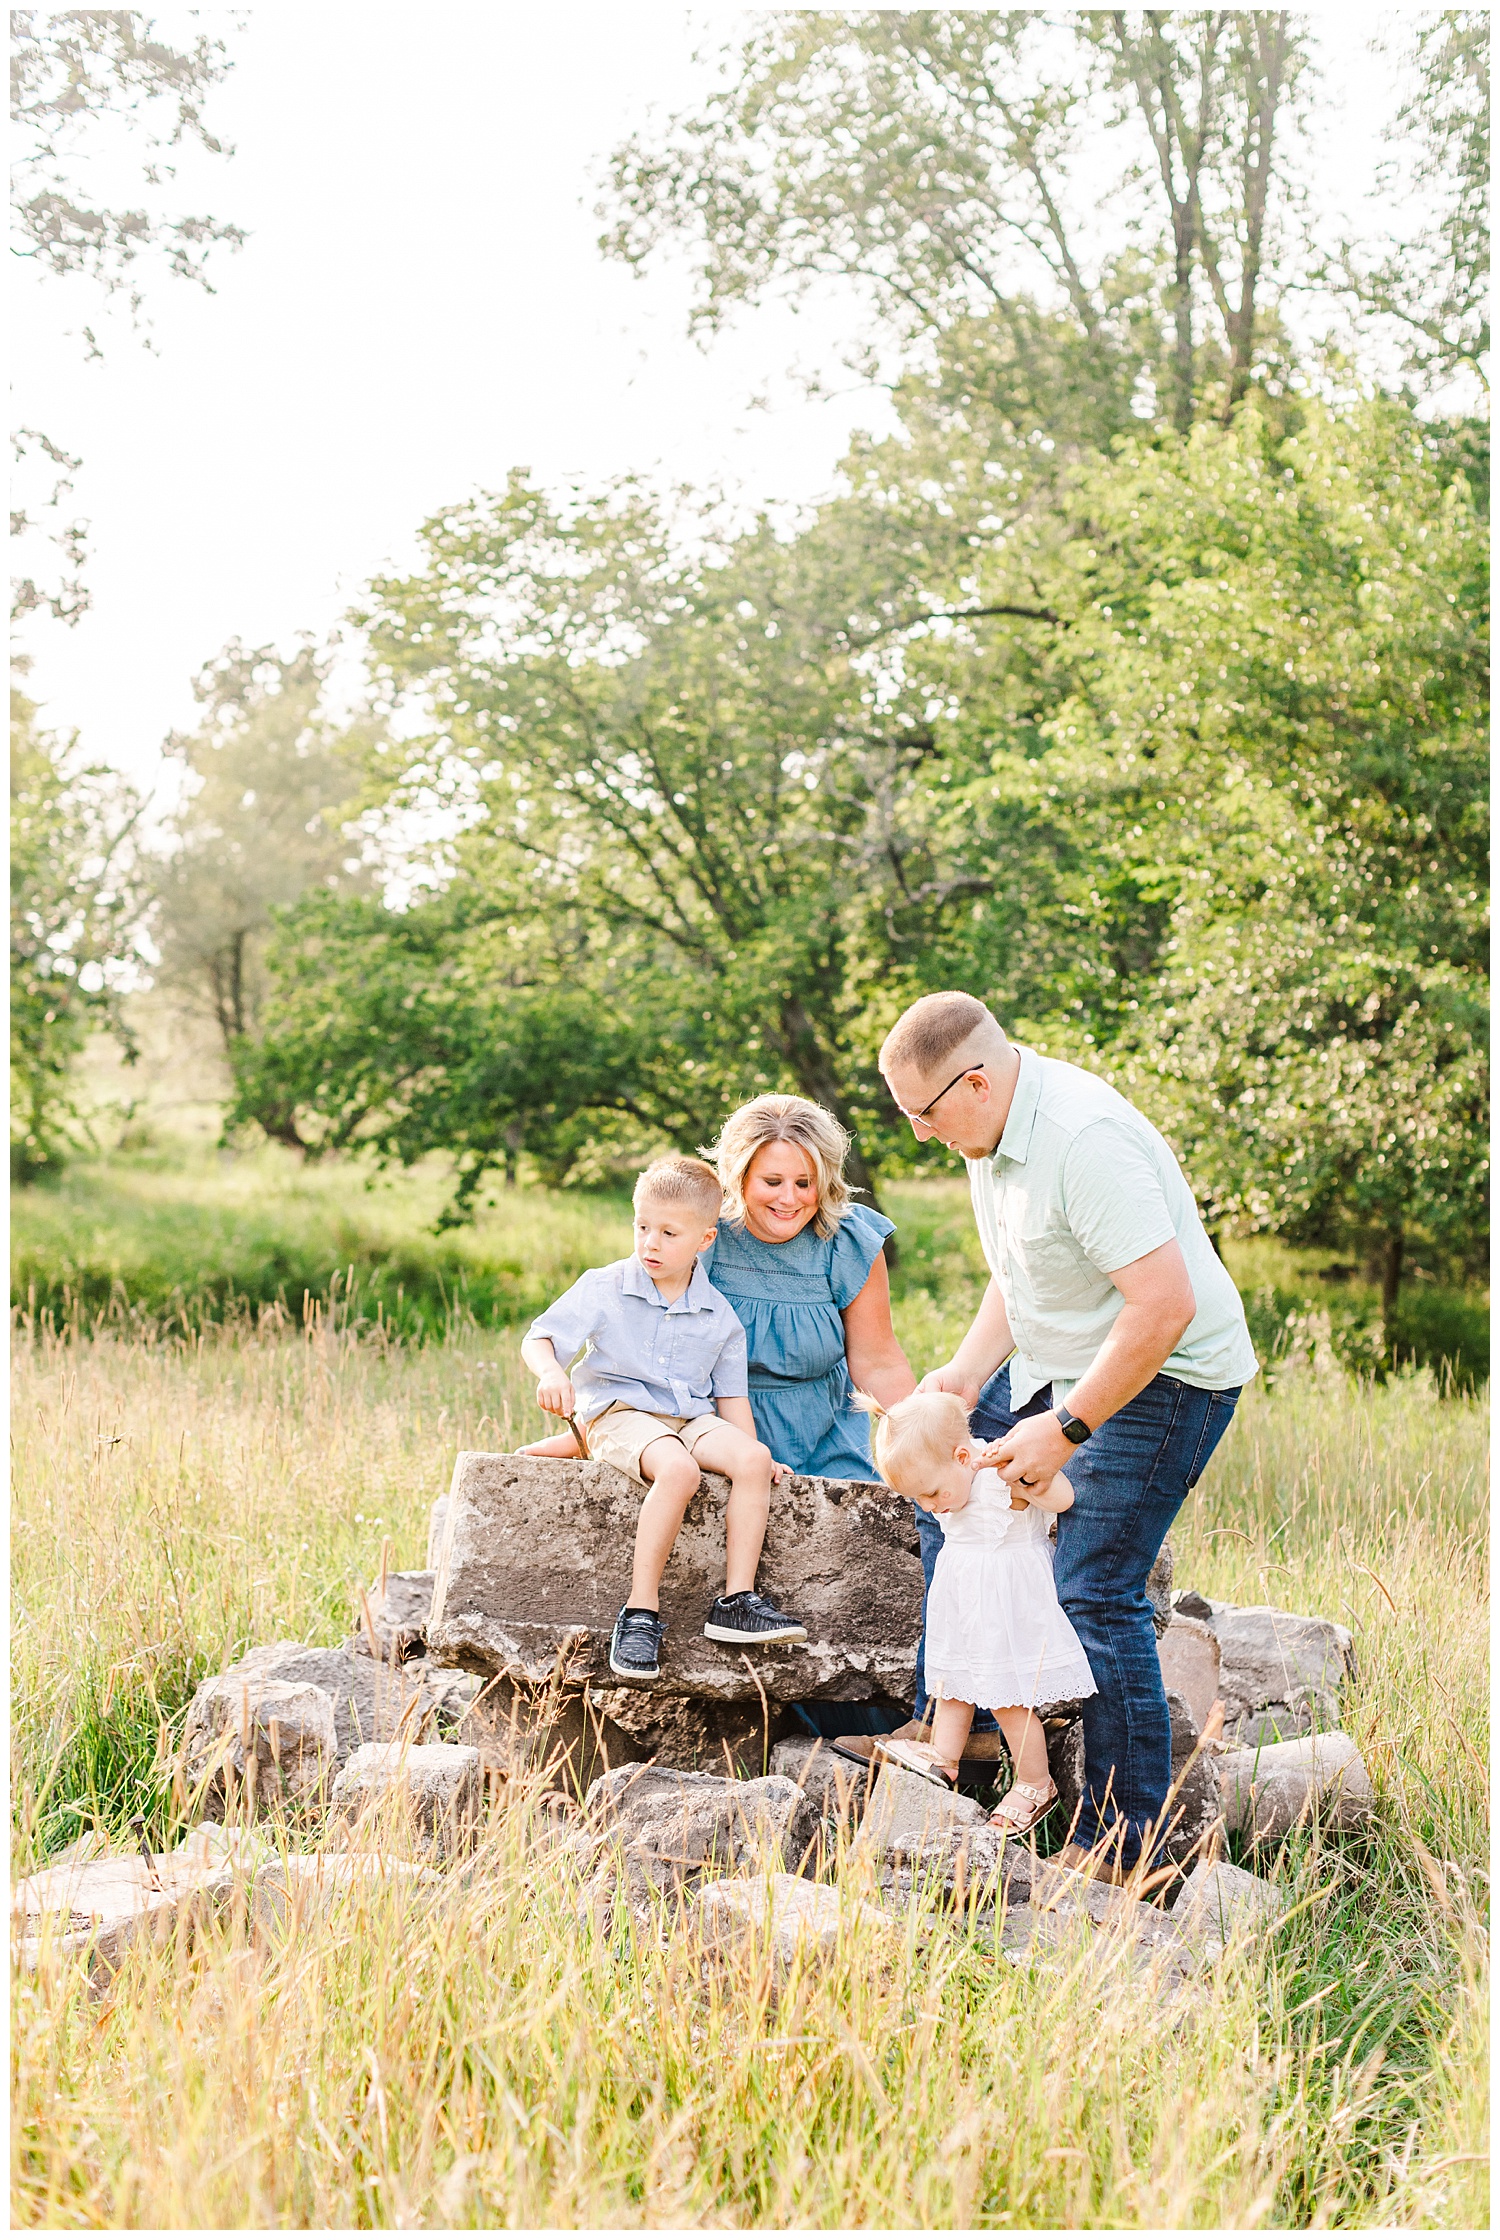 The Bruhn family play together in a grassy pasture in Iowa | CB Studio